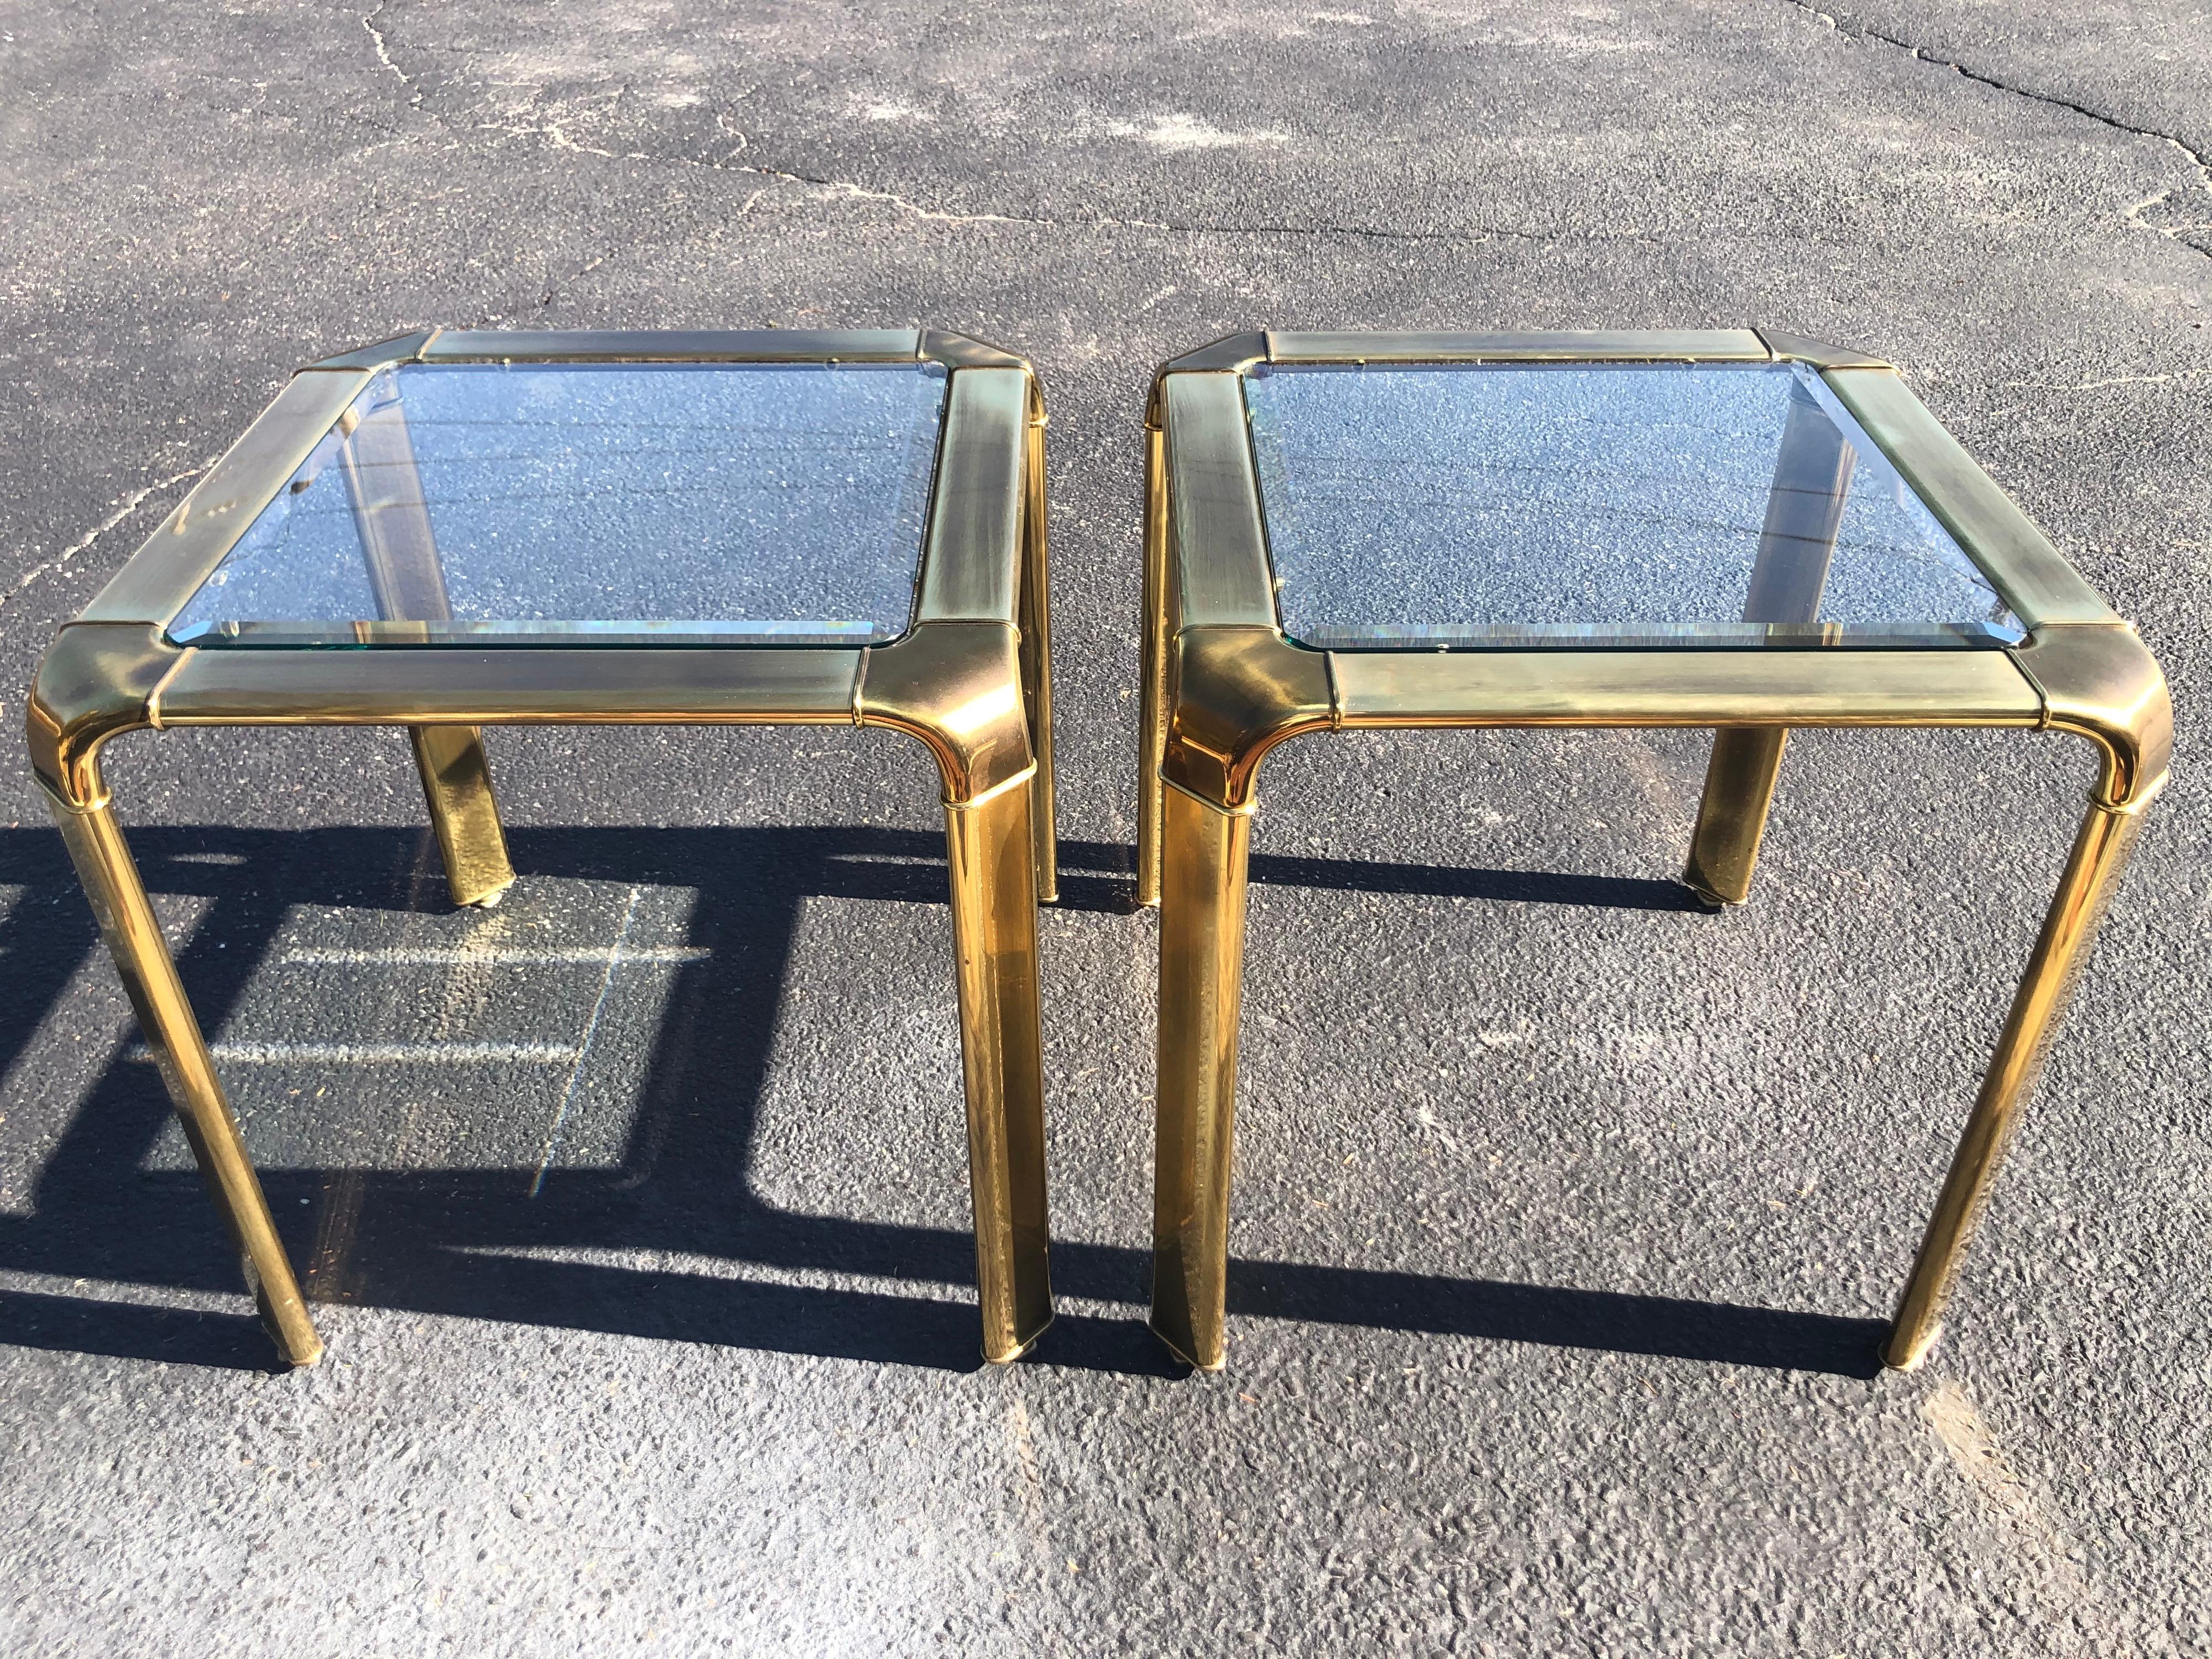 Pair of John Widdicomb brass and glass waterfall tables. Sophisticated, clean lines. Signed and stamped underneath. Perfect as end tables or side tables.